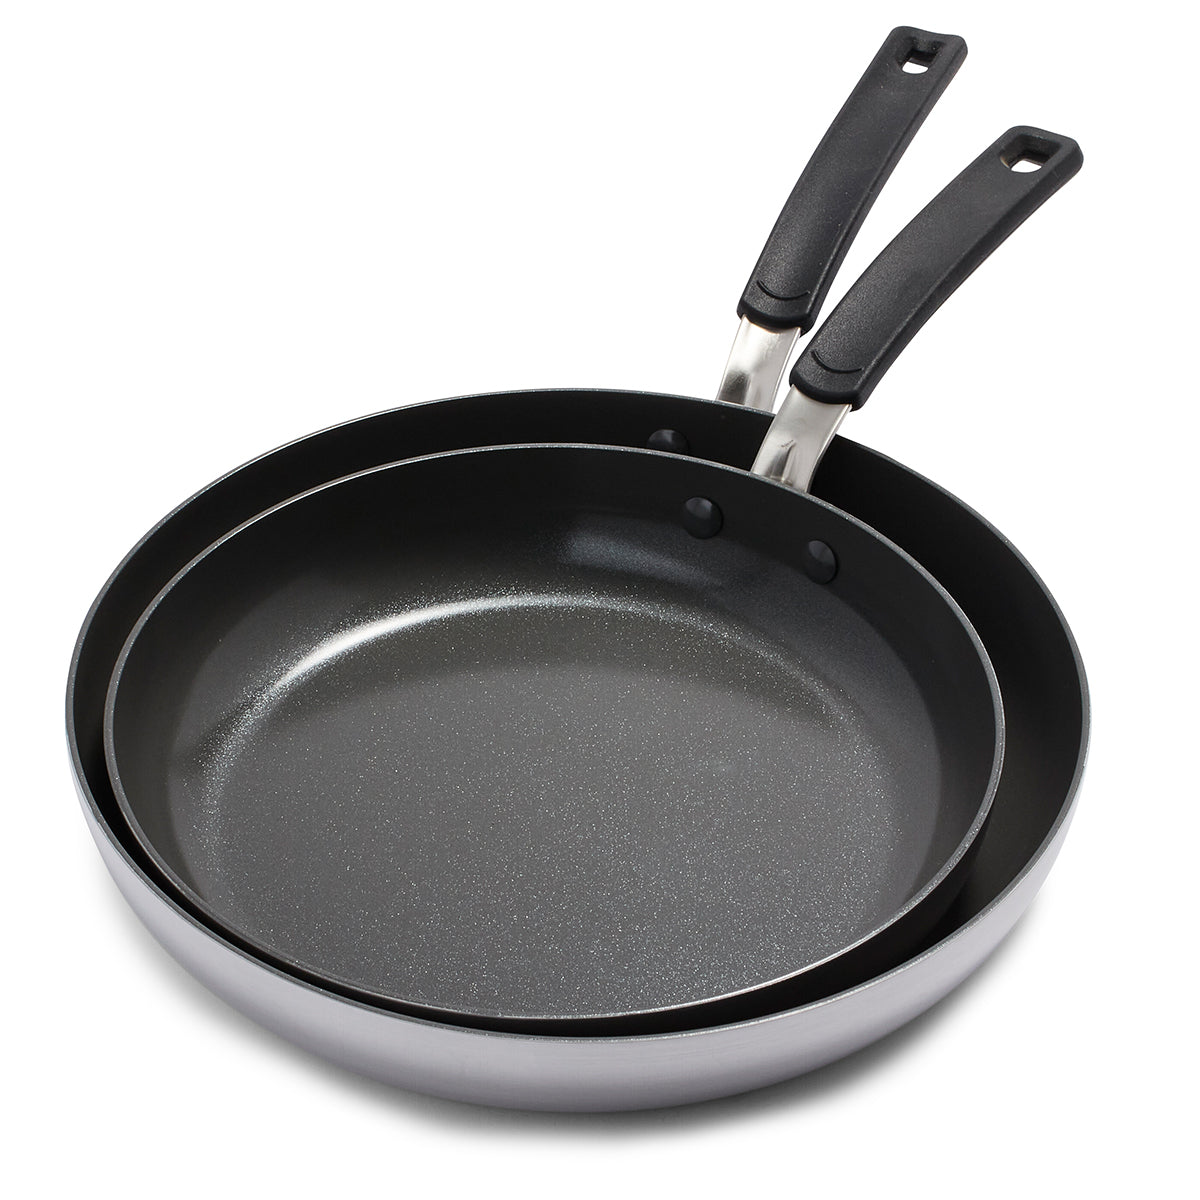 Levels Stainless Steel Stackable Ceramic Nonstick 10